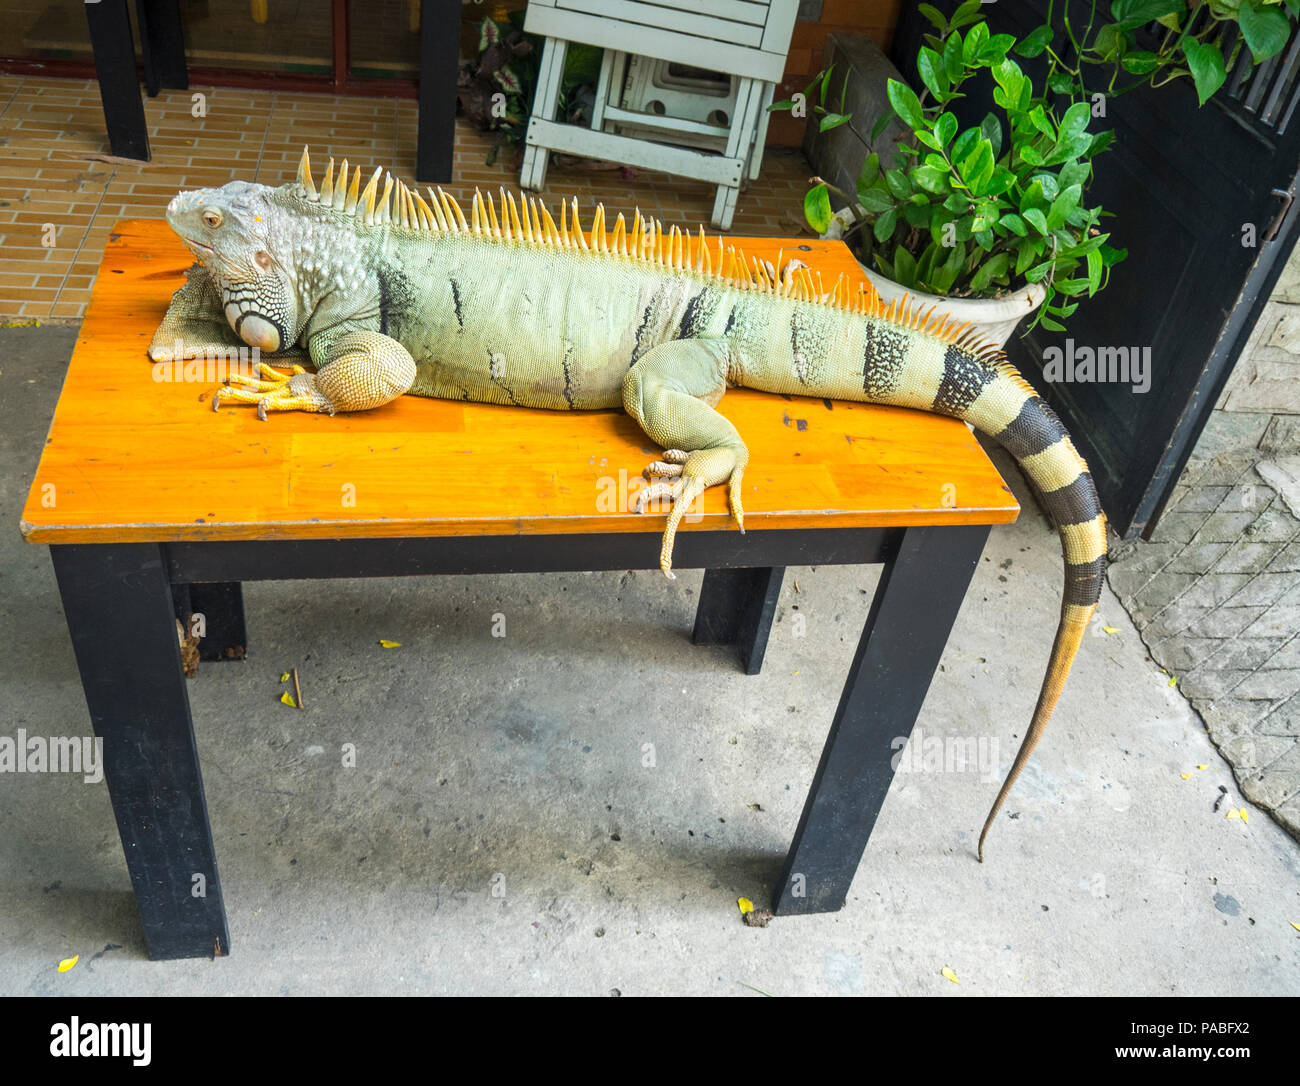 A green iguana on a small table in a coffee shop, Babo Cafe, in Ho Chi Minh City, Vietnam. Stock Photo